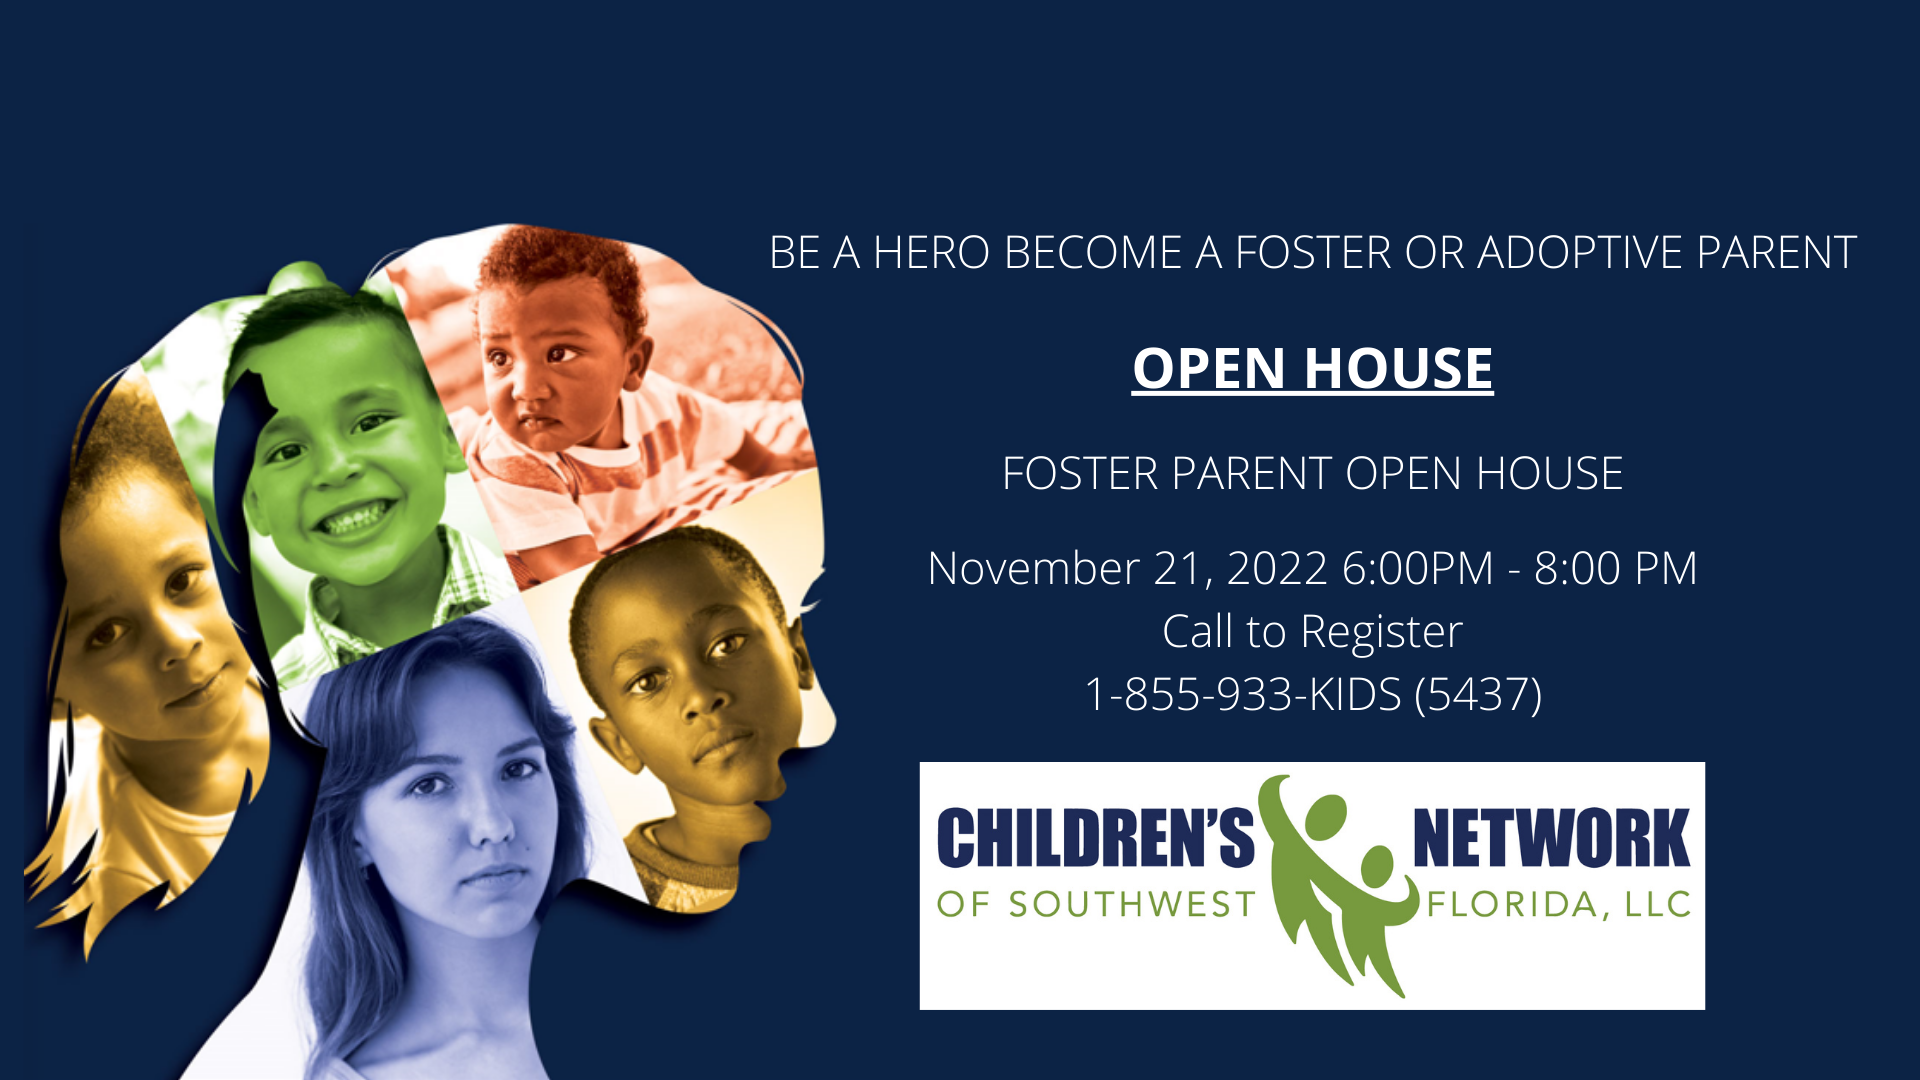 Open House Poster — One More Child